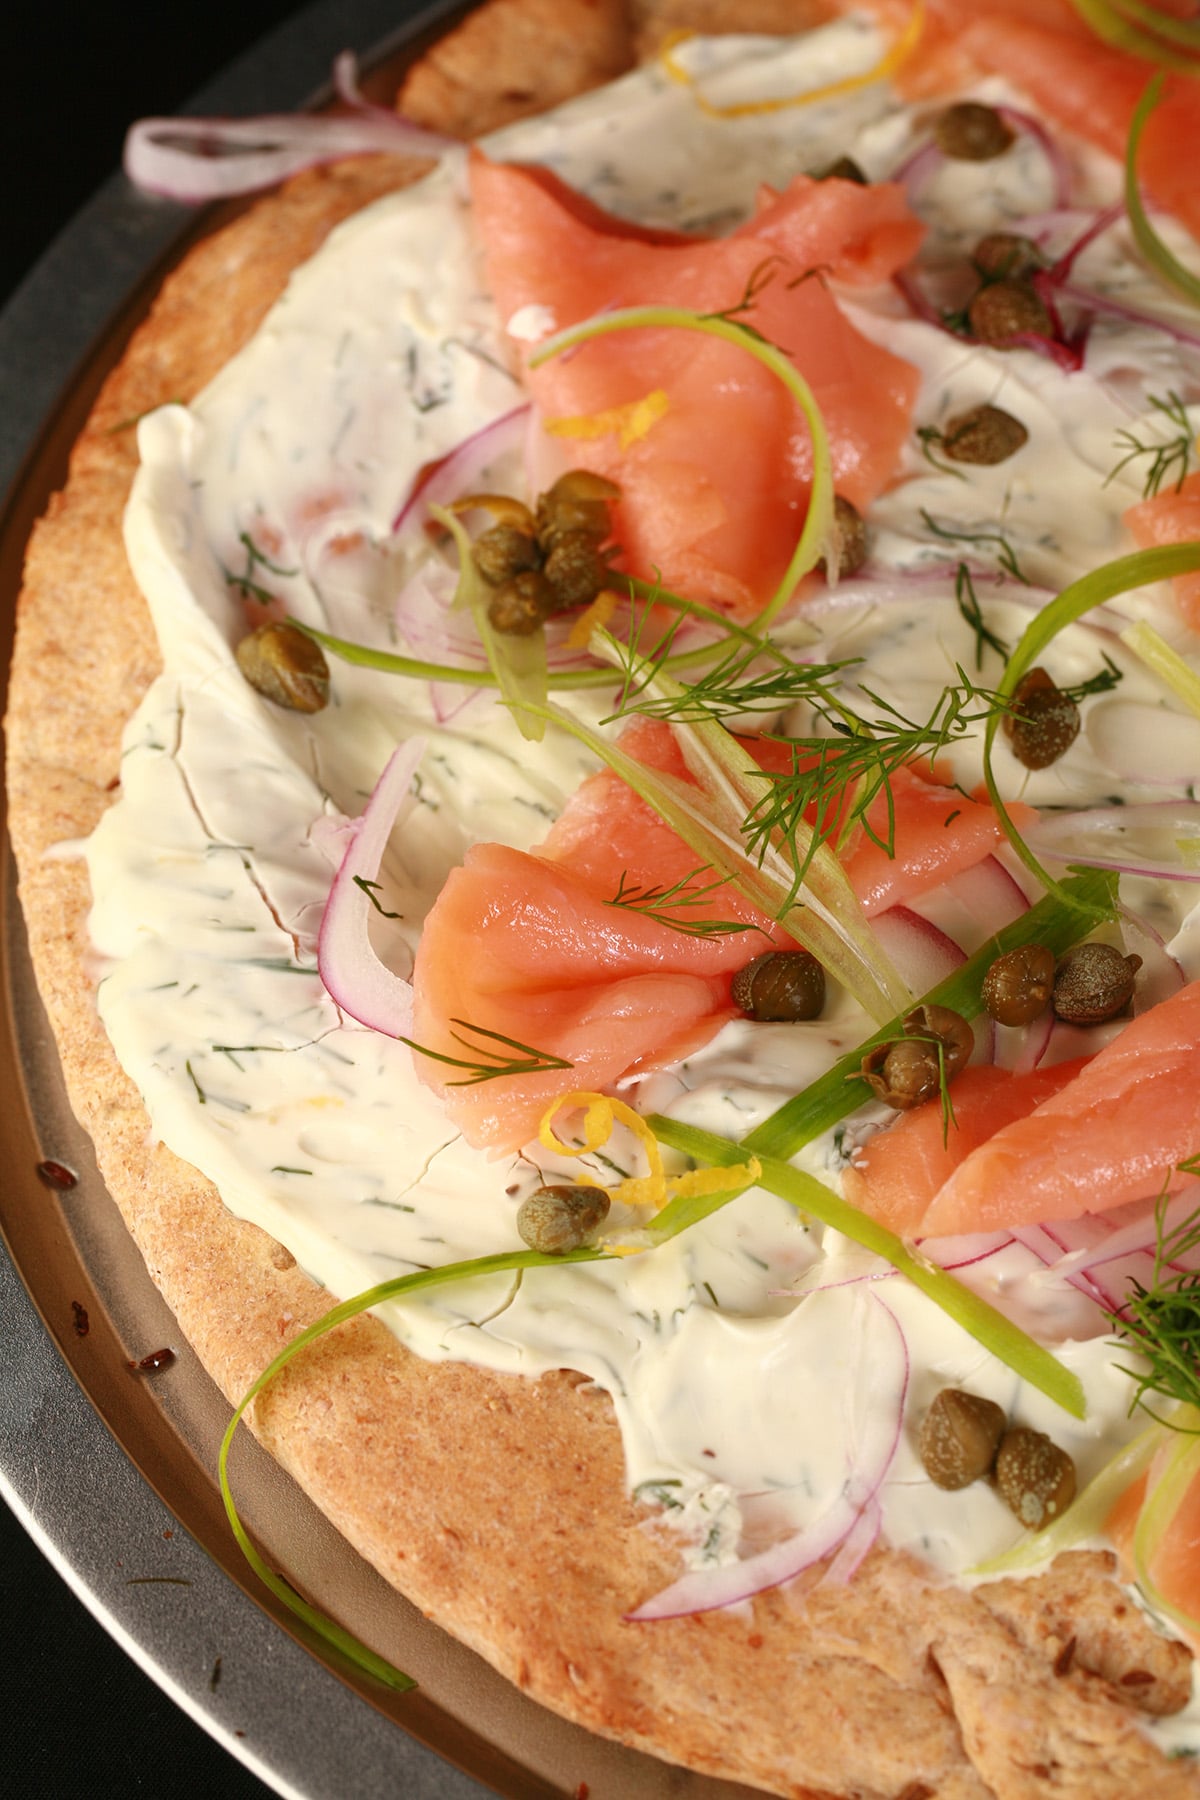 A close up view of smoked salmon pizza. The crust is rye, and it's topped with cream cheese sauce, smoked salmon, and other toppings.